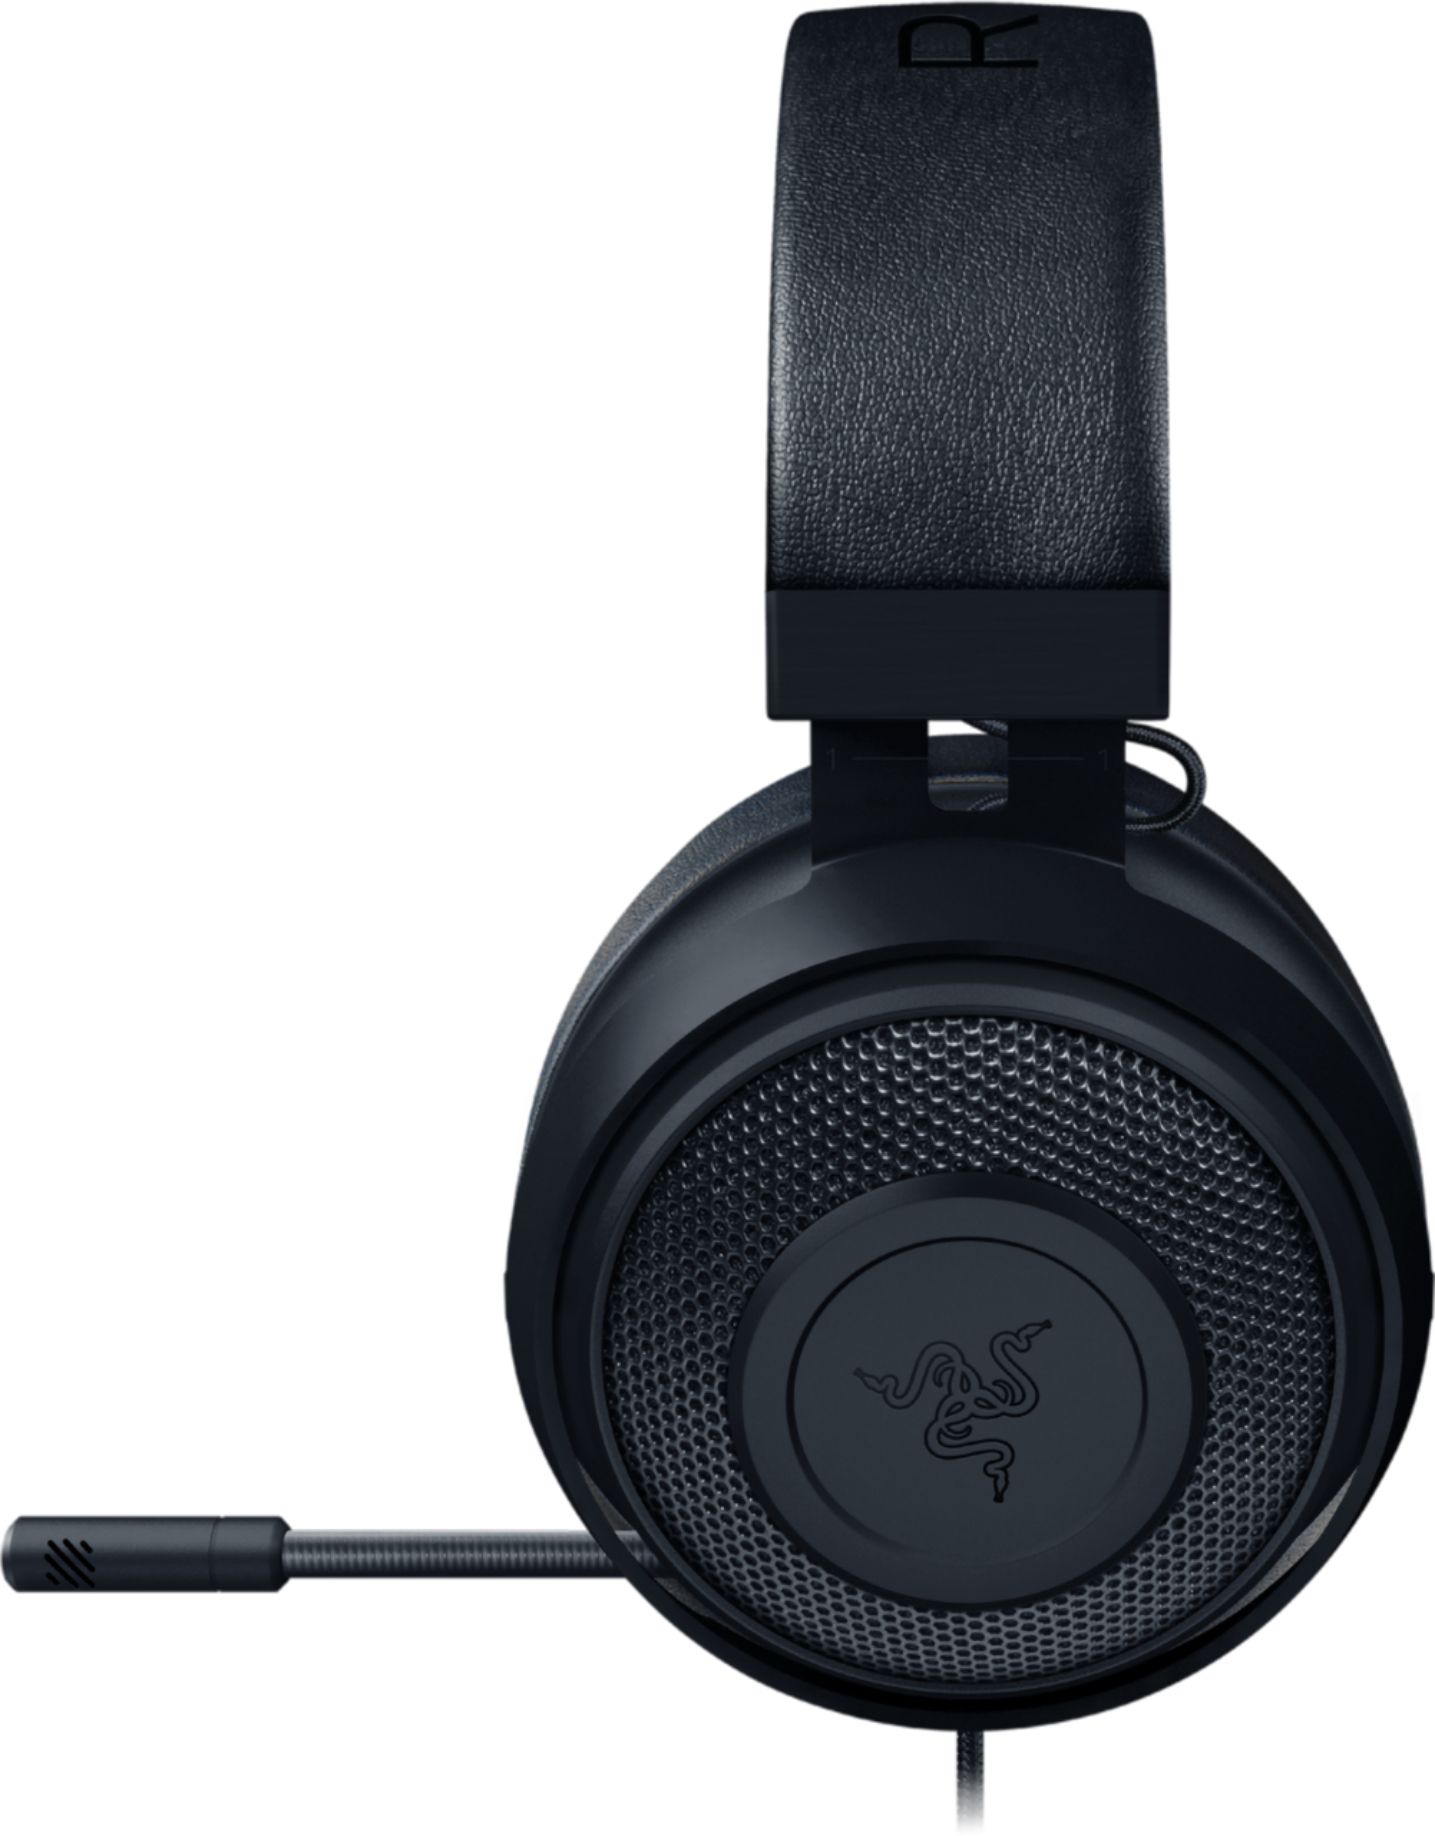 Razer - Kraken Wired 7.1 Surround Sound Gaming Headset for PC, PS4, PS5,  Switch, Xbox One, Series X|S - Black